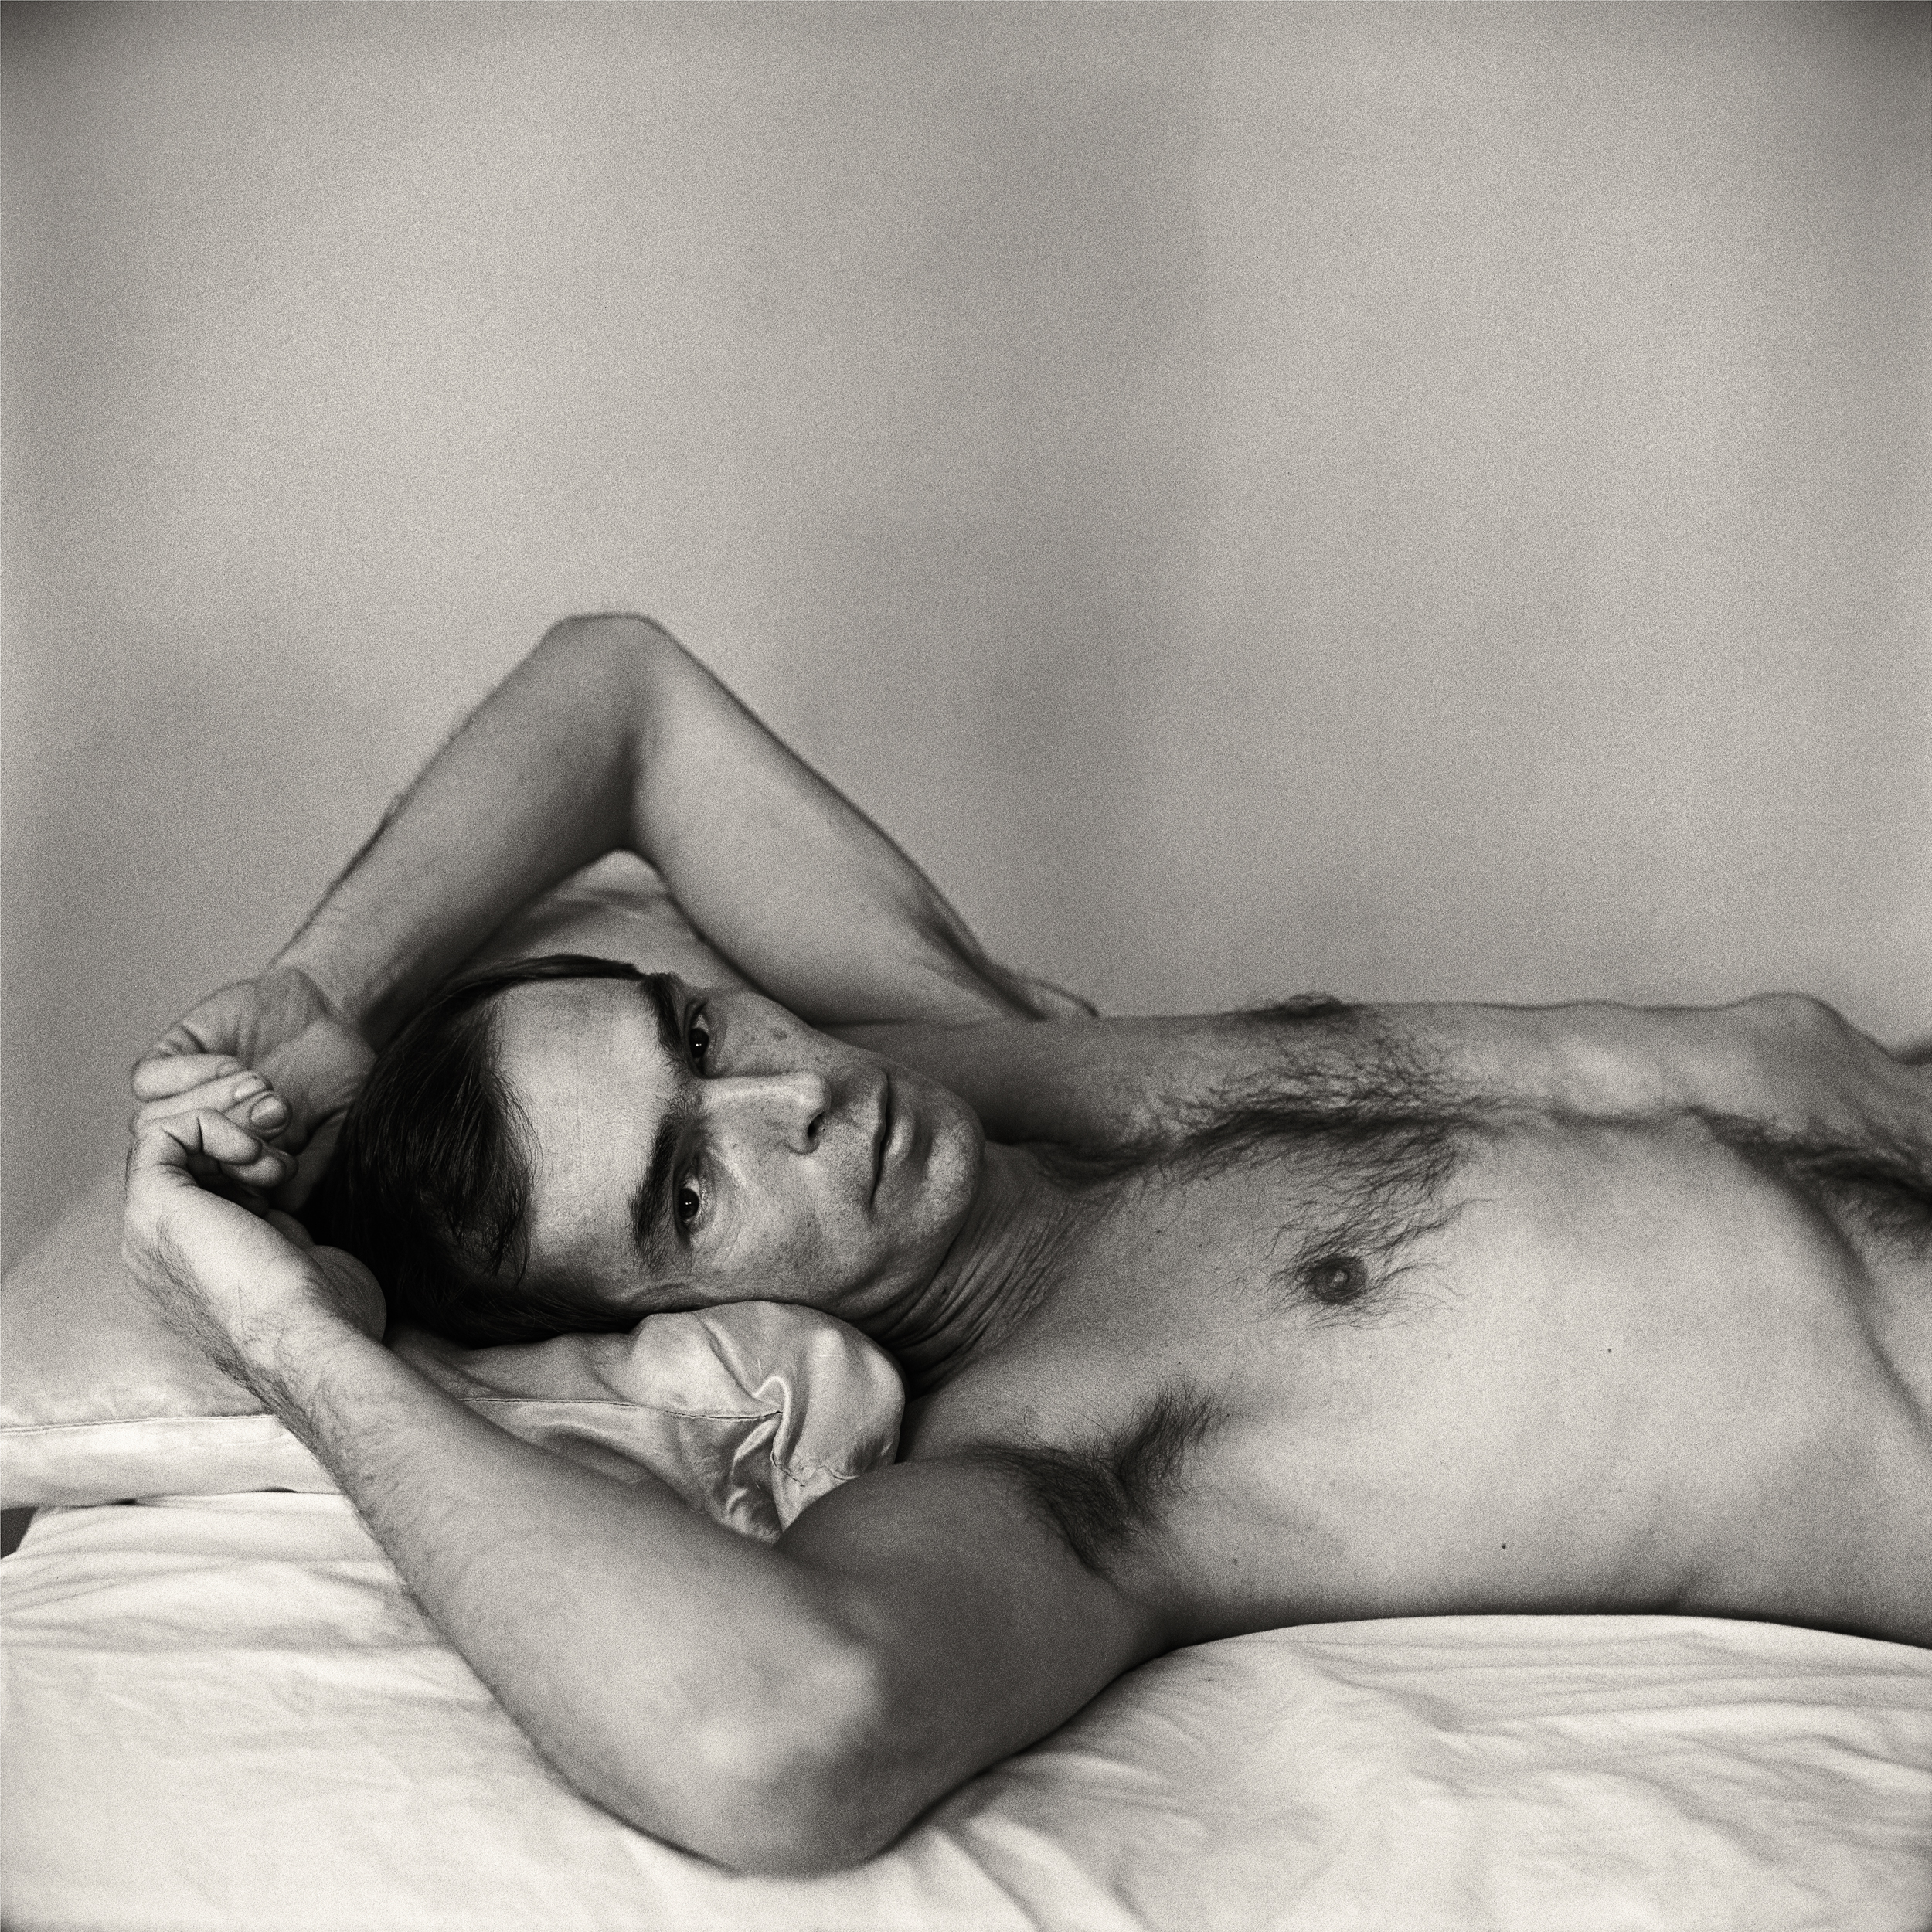 Black and white photograph of a shirtless dark-haired man reclining with his hands in his hair